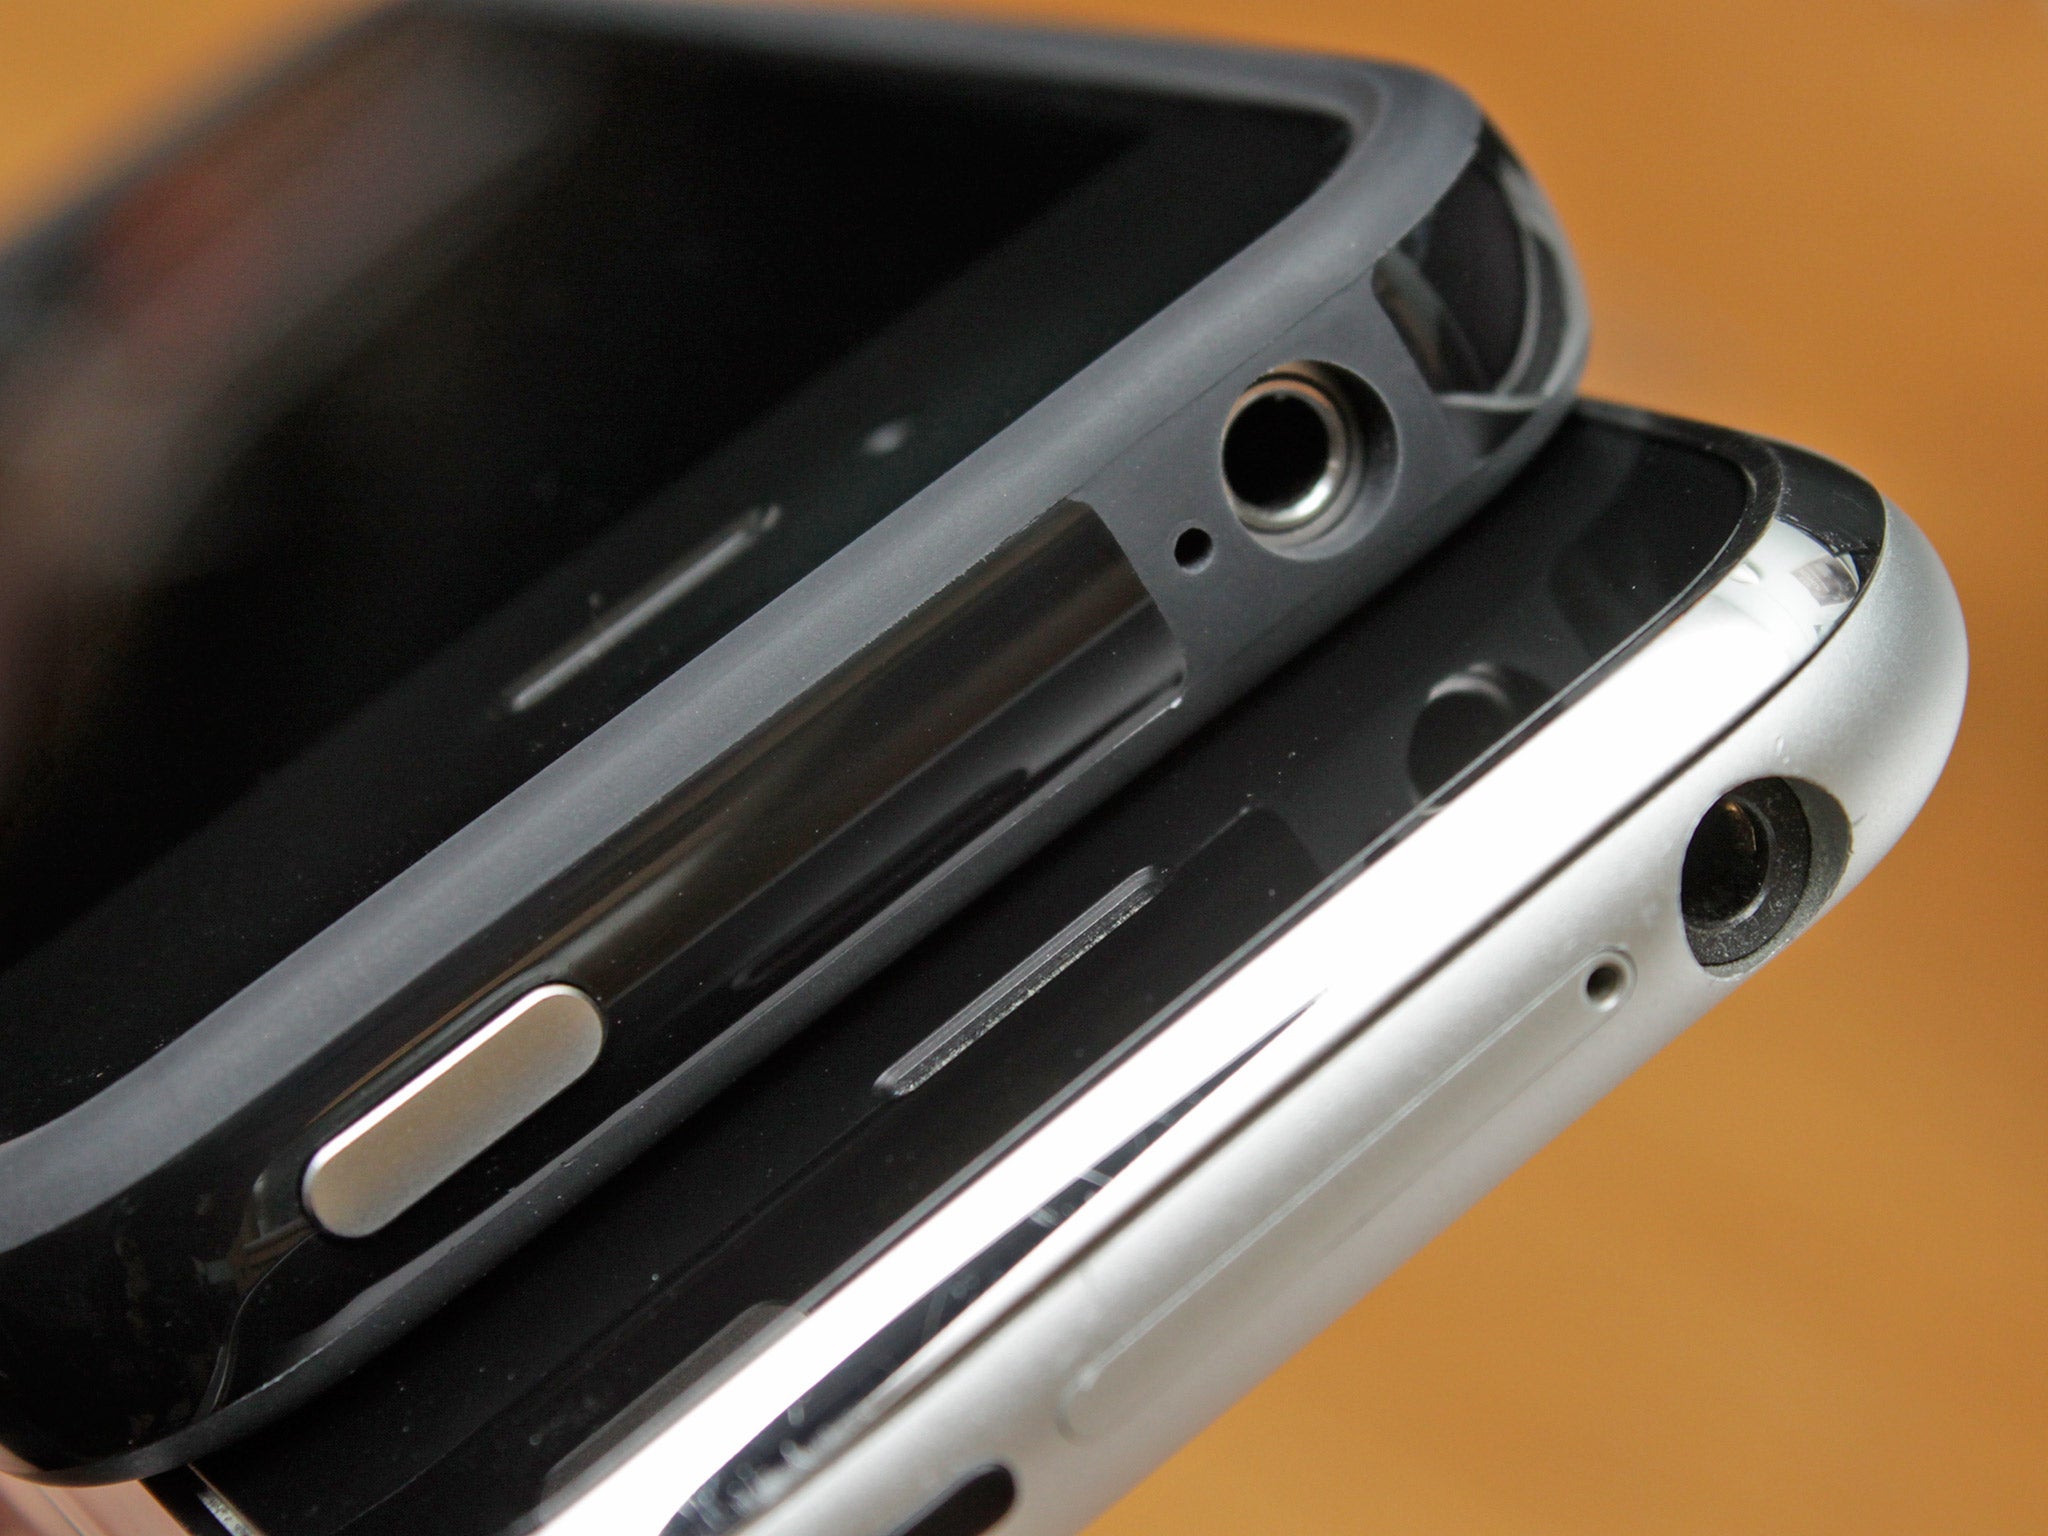 Apple is to do away with the 3.5mm jack